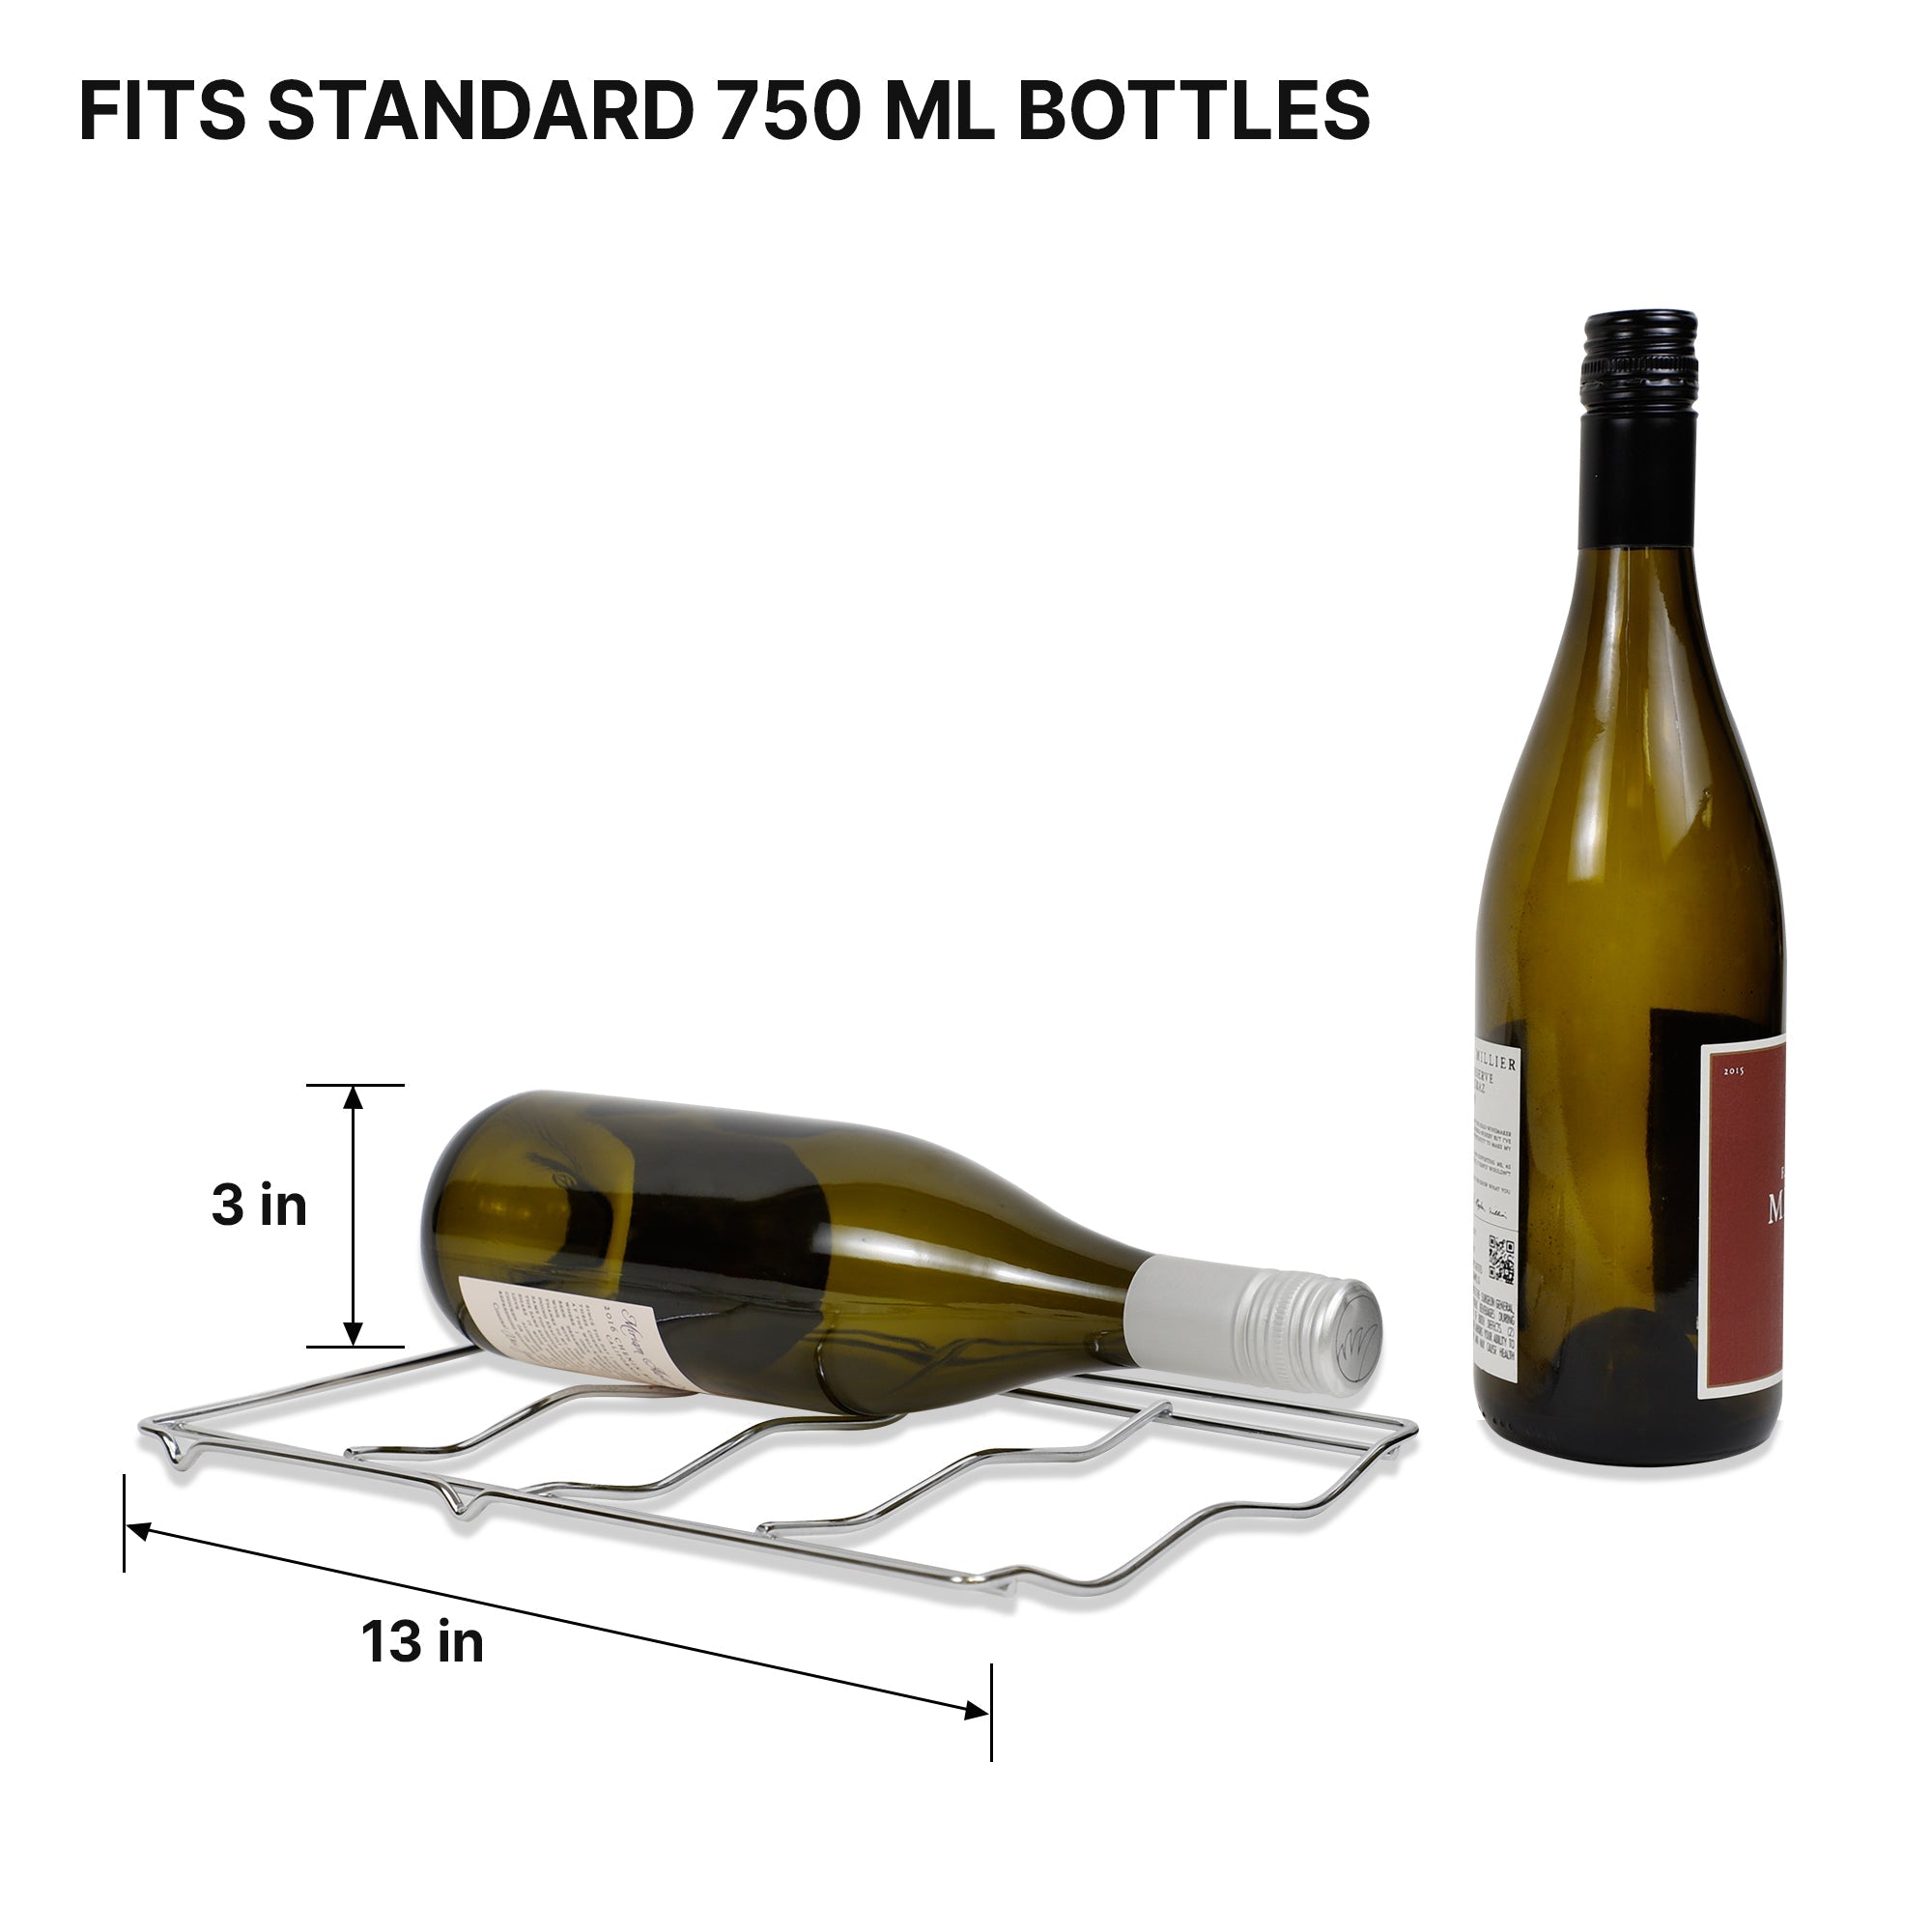 Removable wire rack from Koolatron dual zone 12 bottle wine chiller with dimensions listed and one wine bottle lying on it and one standing up beside it. Text above reads "Fits standard 750 mL bottles"